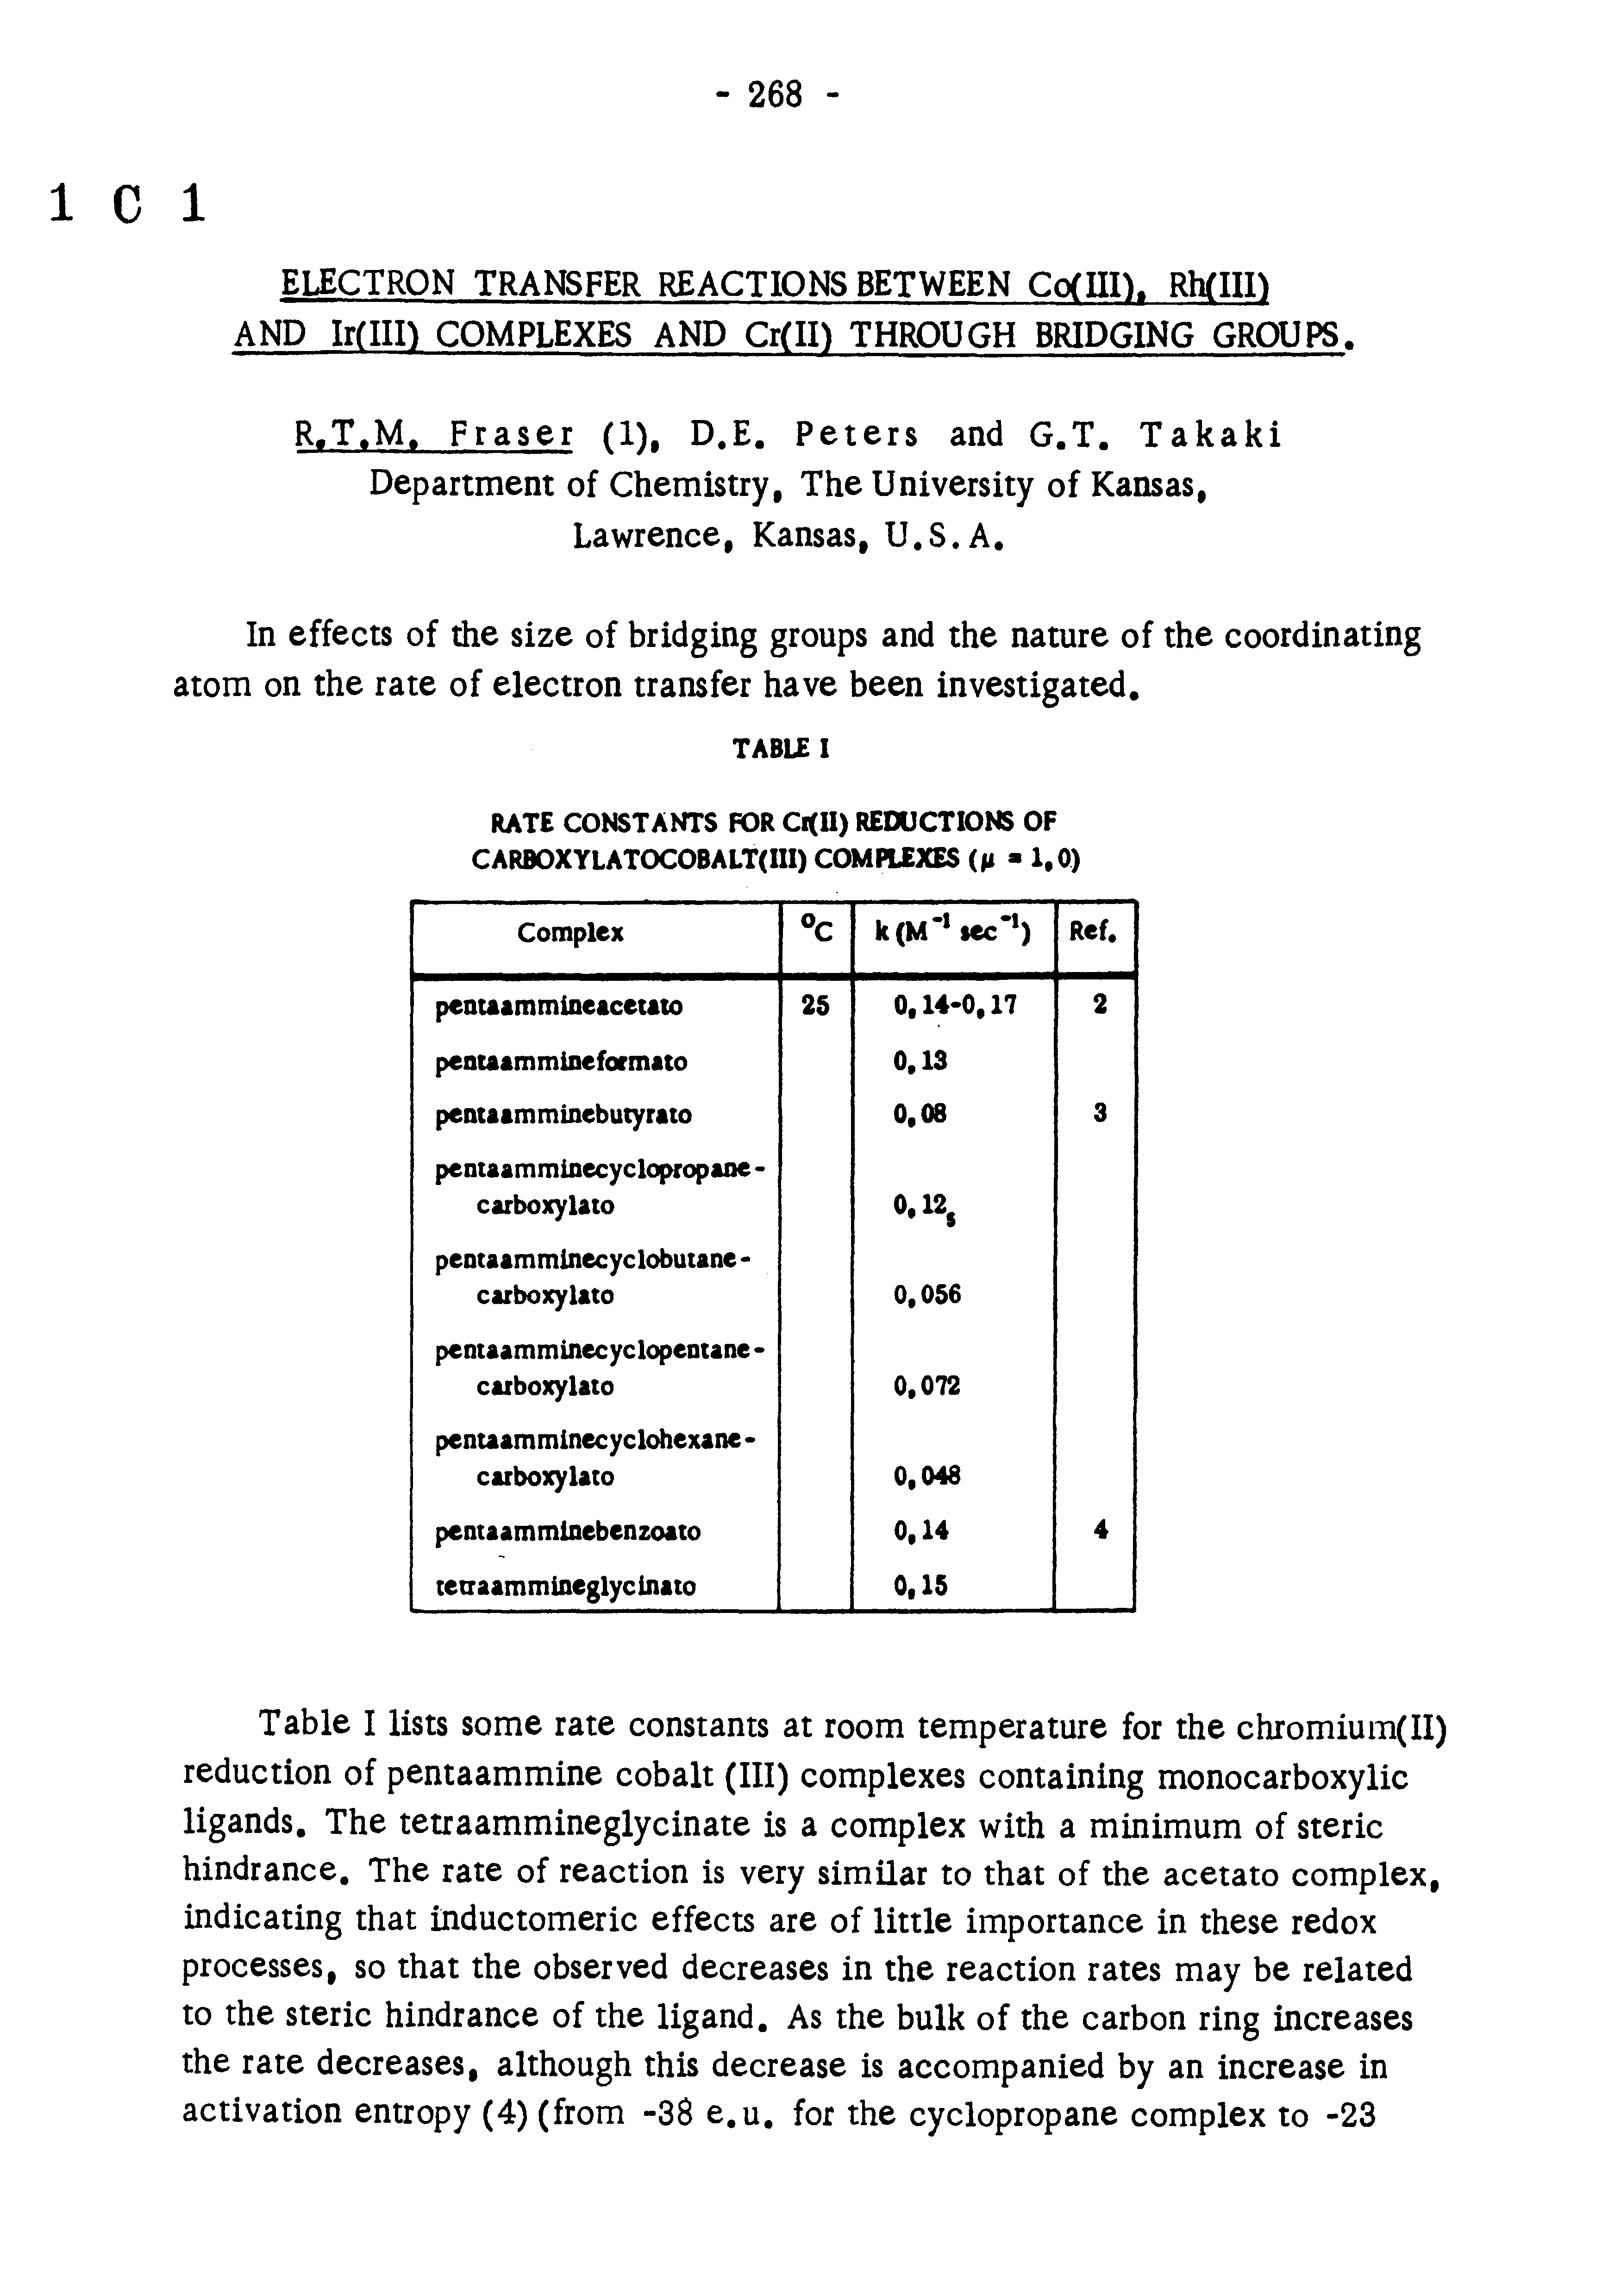 Table I lists some rate constants at room temperature for the chromium(Il) reduction of pentaammine cobalt (III) complexes containing monocarboxylic ligands. The tetraammineglycinate is a complex with a minimum of steric hindrance. The rate of reaction is very similar to that of the acetato complex, indicating that inductomeric effects are of little importance in these redox processes, so that the observed decreases in the reaction rates may be related to the steric hindrance of the ligand. As the bulk of the carbon ring increases the rate decreases, although this decrease is accompanied by an increase in activation entropy (4) (from -38 e,u, for the cyclopropane complex to -23...